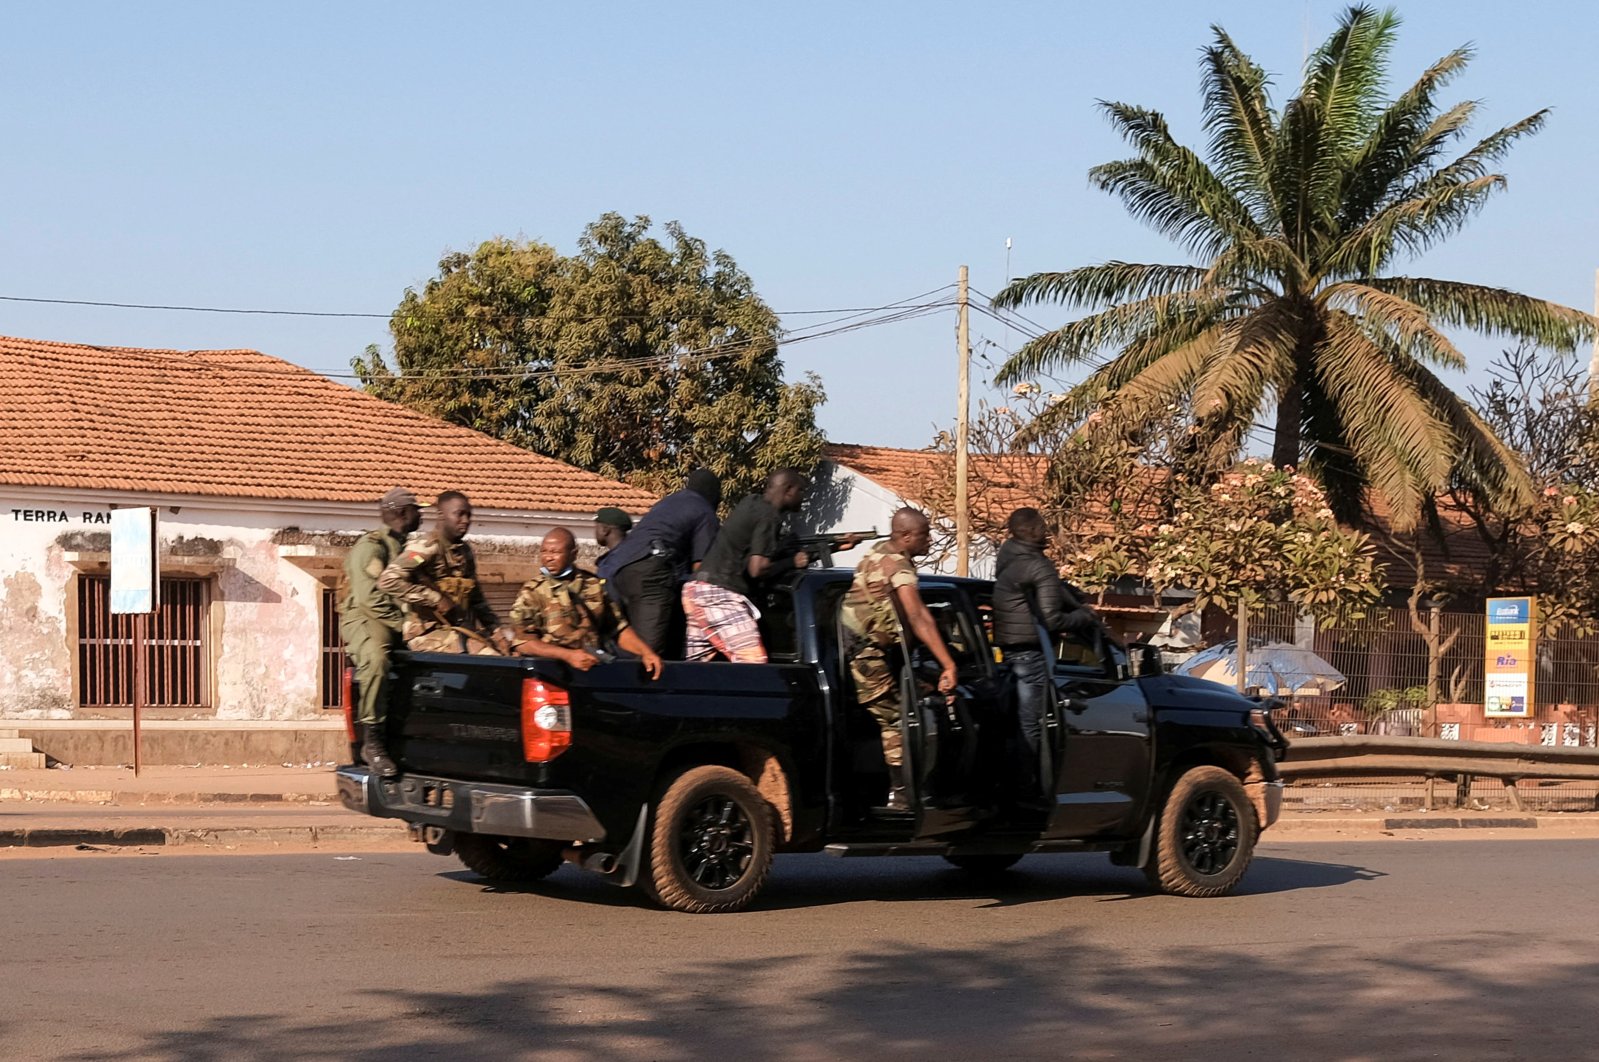 Armed soldiers move on the main artery of the capital after heavy gunfire around the presidential palace in Bissau, Guinea, Feb. 1, 2022. (Reuters Photo)